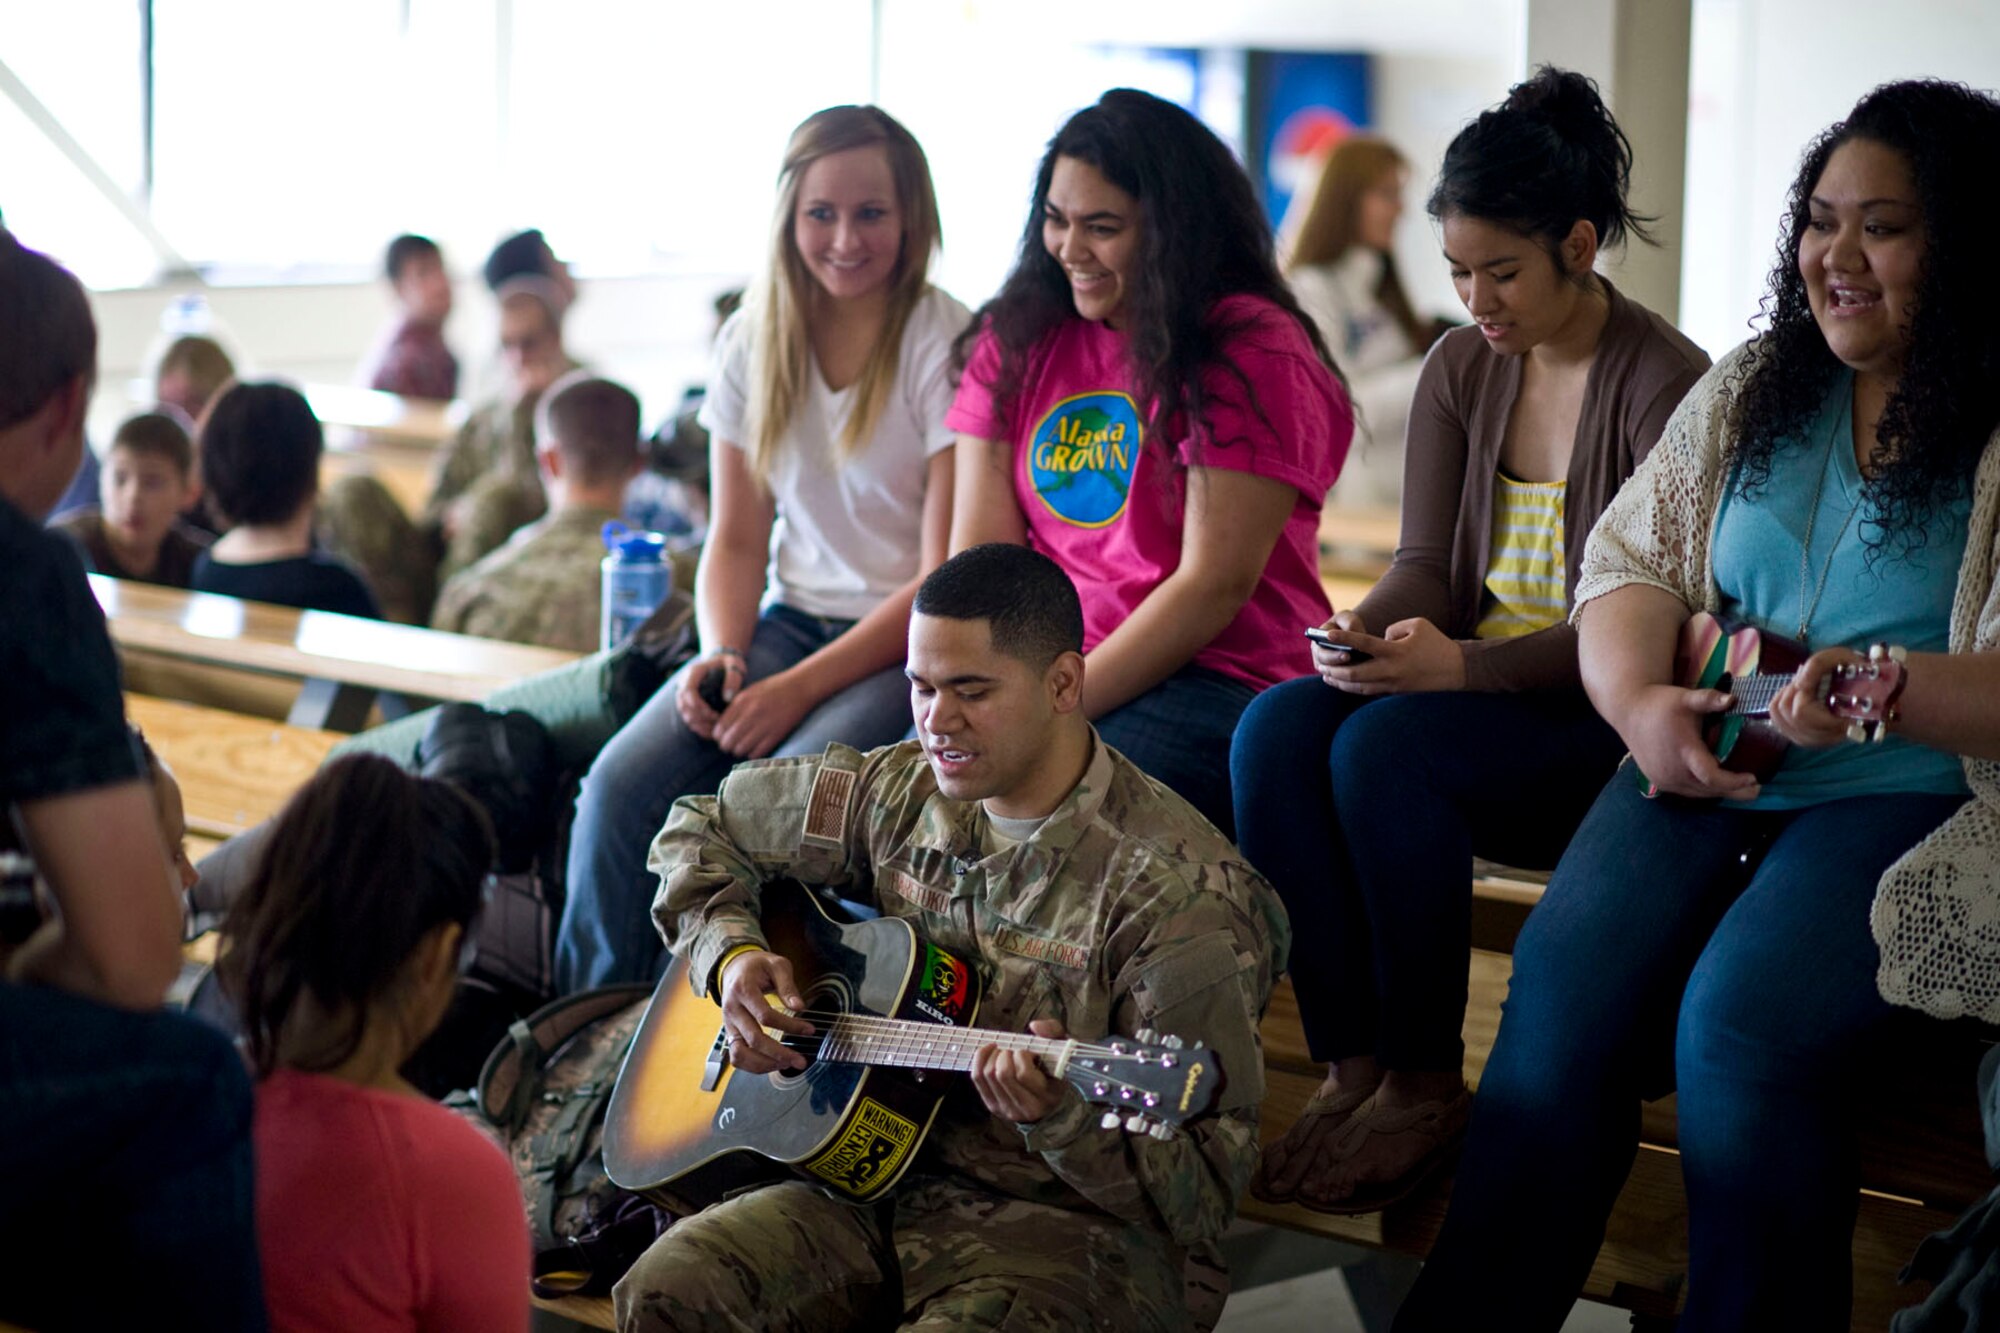 JOINT BASE ELMENDORF-RICHARDSON, Alaska - Senior Airman Donald Haretuku, an aircrew flight equipment specialist for the Alaska Air National Guard's 176th Operations Support Squadron, plays the guitar and sings with family and friends while waiting to depart Alaska for Afghanistan May 28, 2012. More than 180 members of the Alaska Air National Guard's 176th Wing are deploying for about 120 days in support of Operation Enduring Freedom. (National Guard photo by Master Sgt. Shannon Oleson)